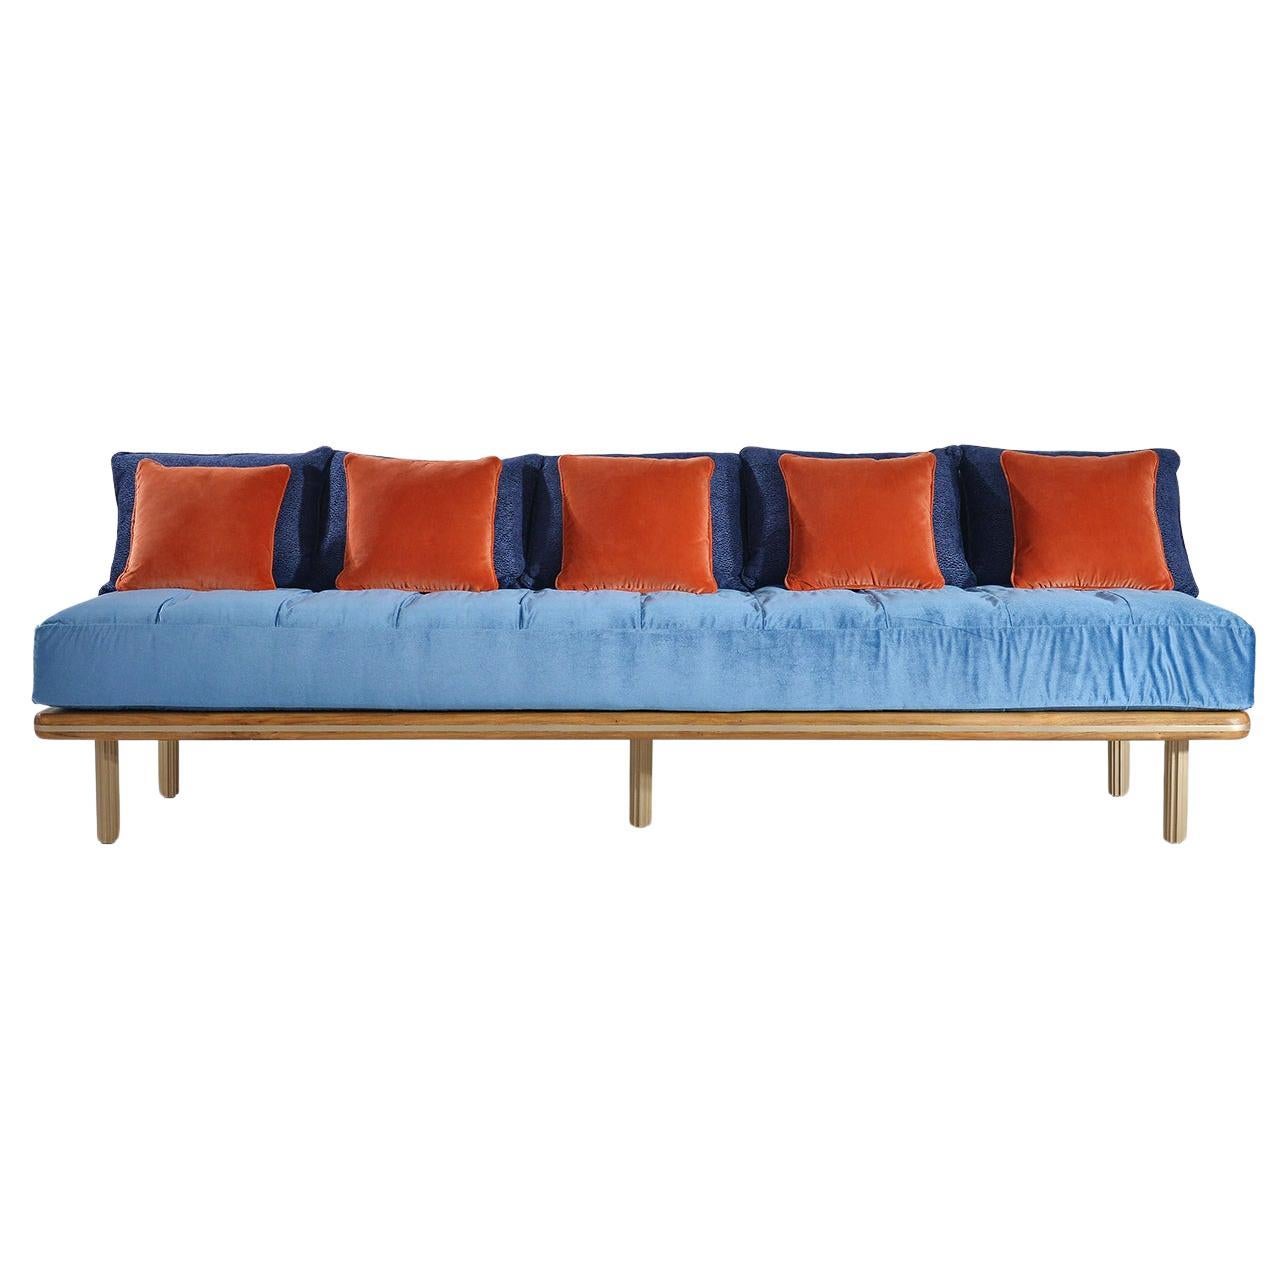 Bespoke Sofa with rounded base edge, Inlaid with brass strip by P.Tendercool For Sale